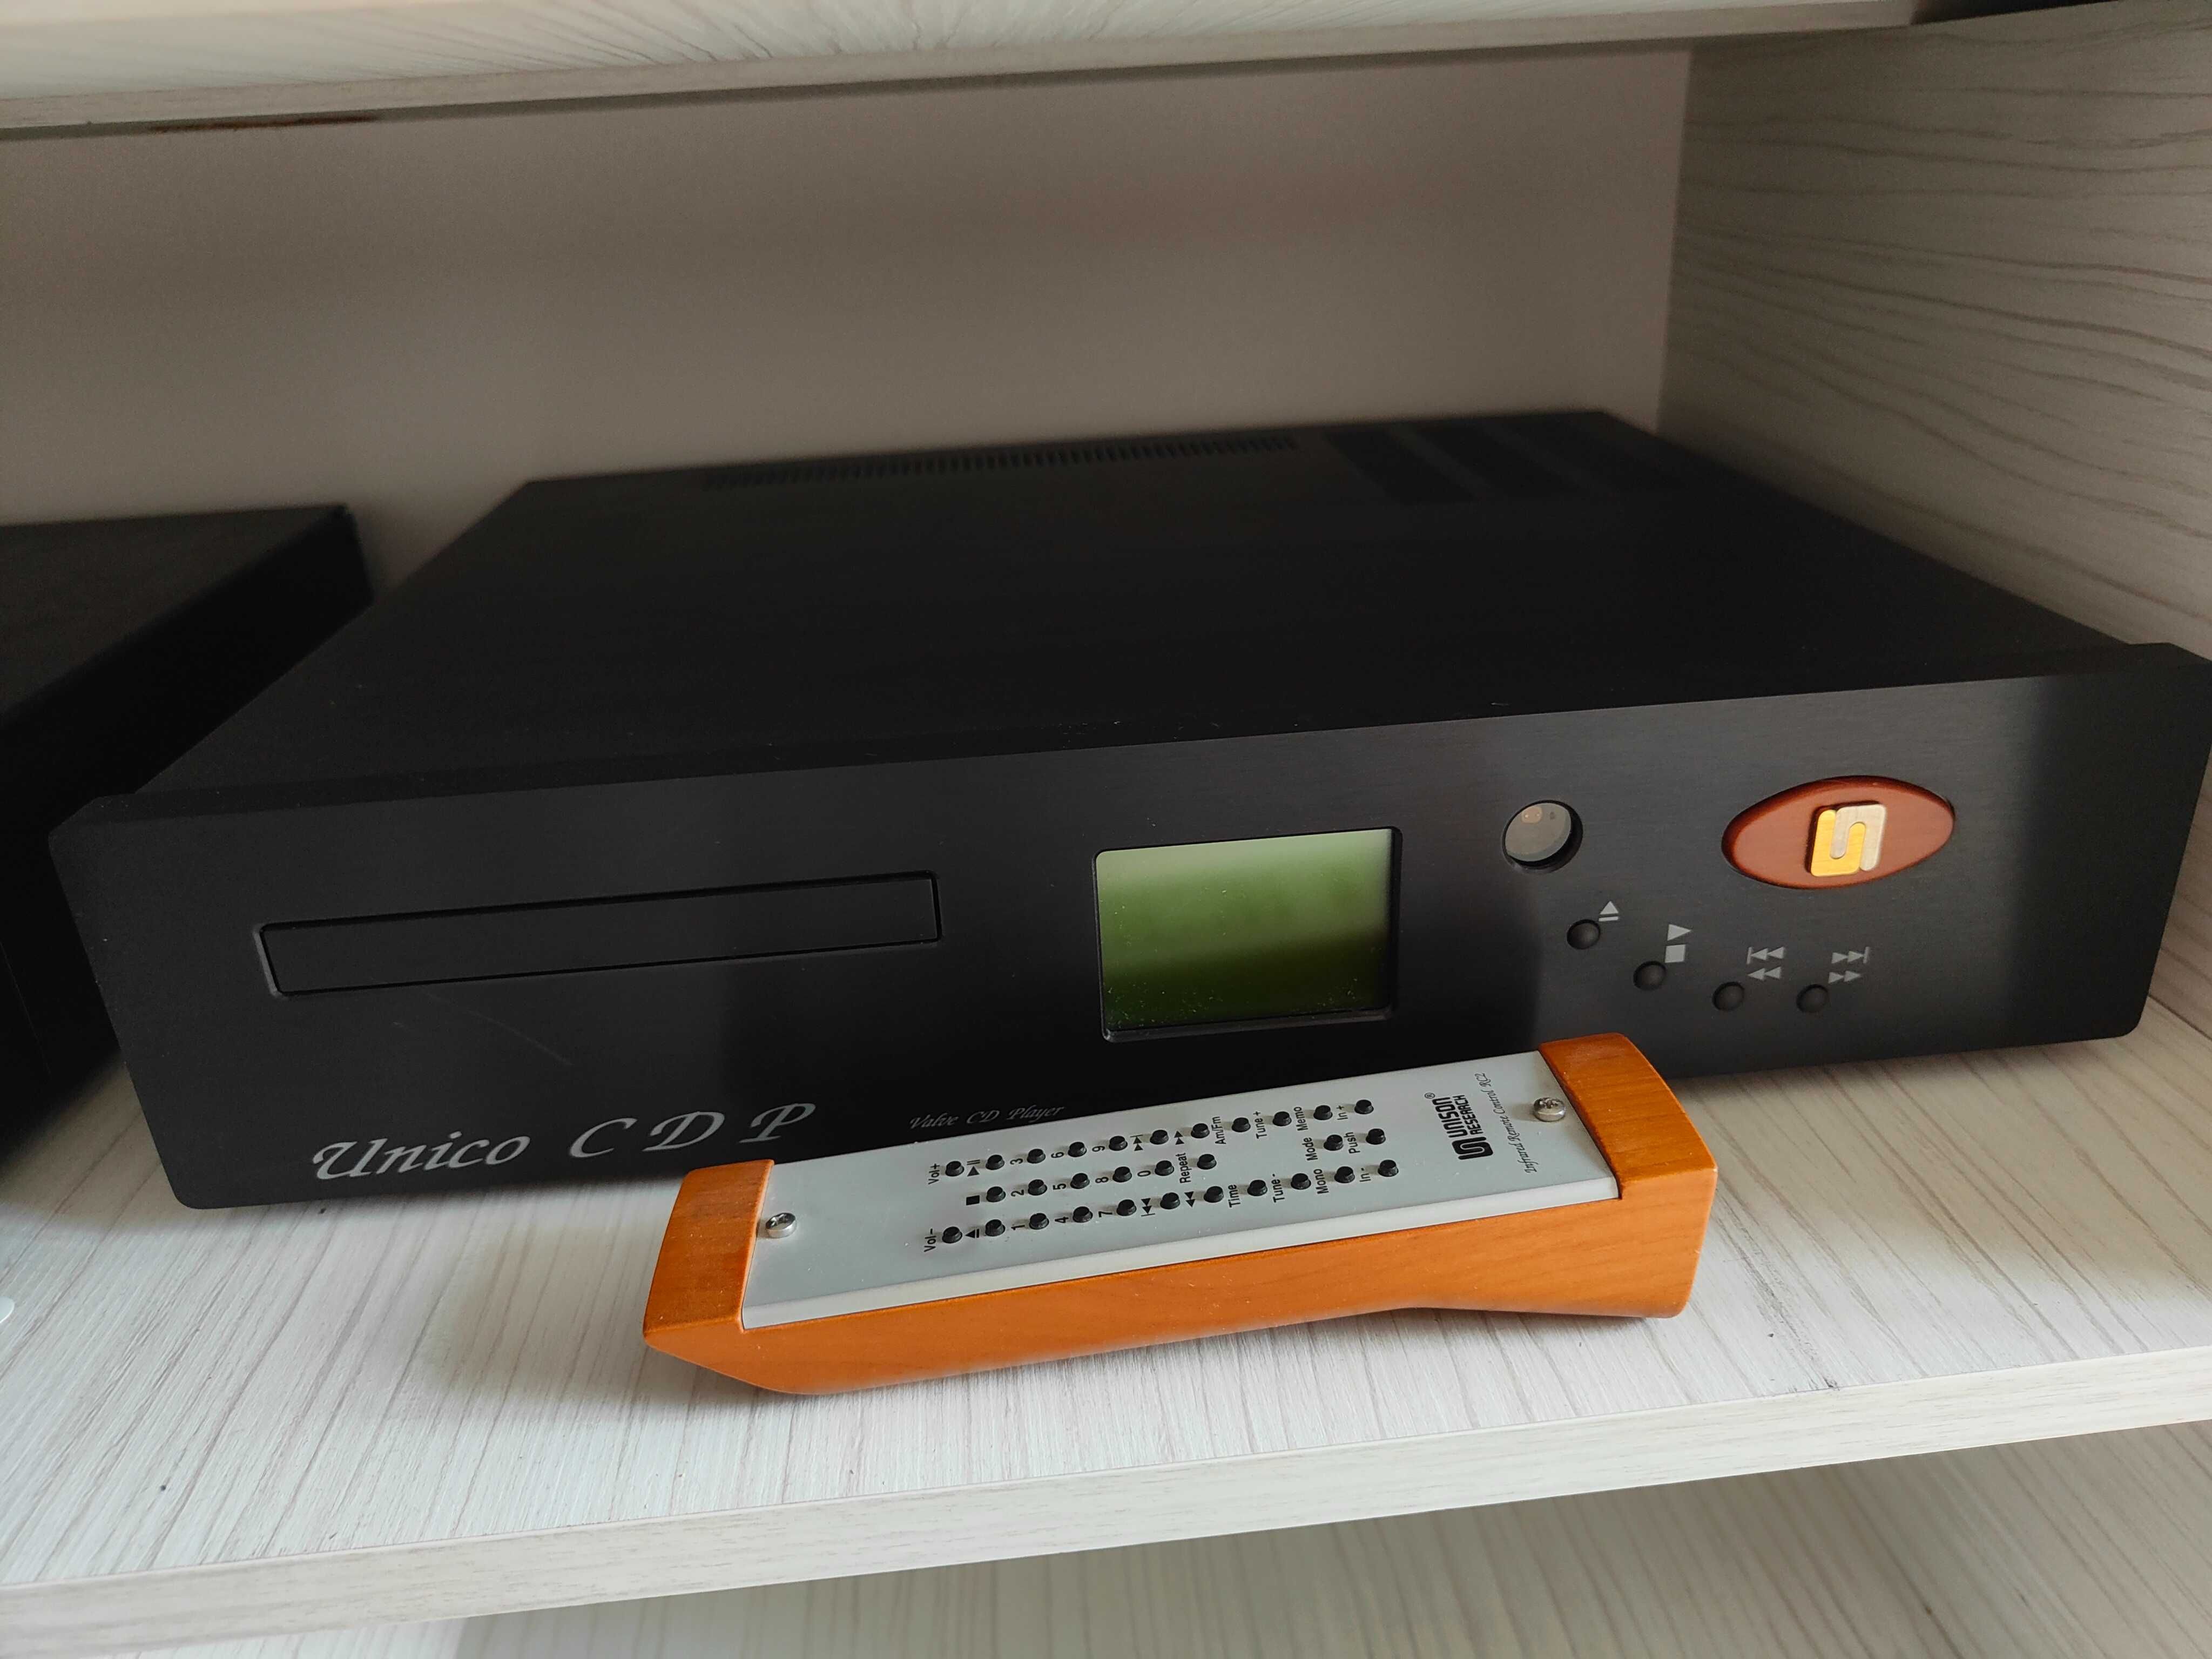 CD player Unison Research Unico CDP